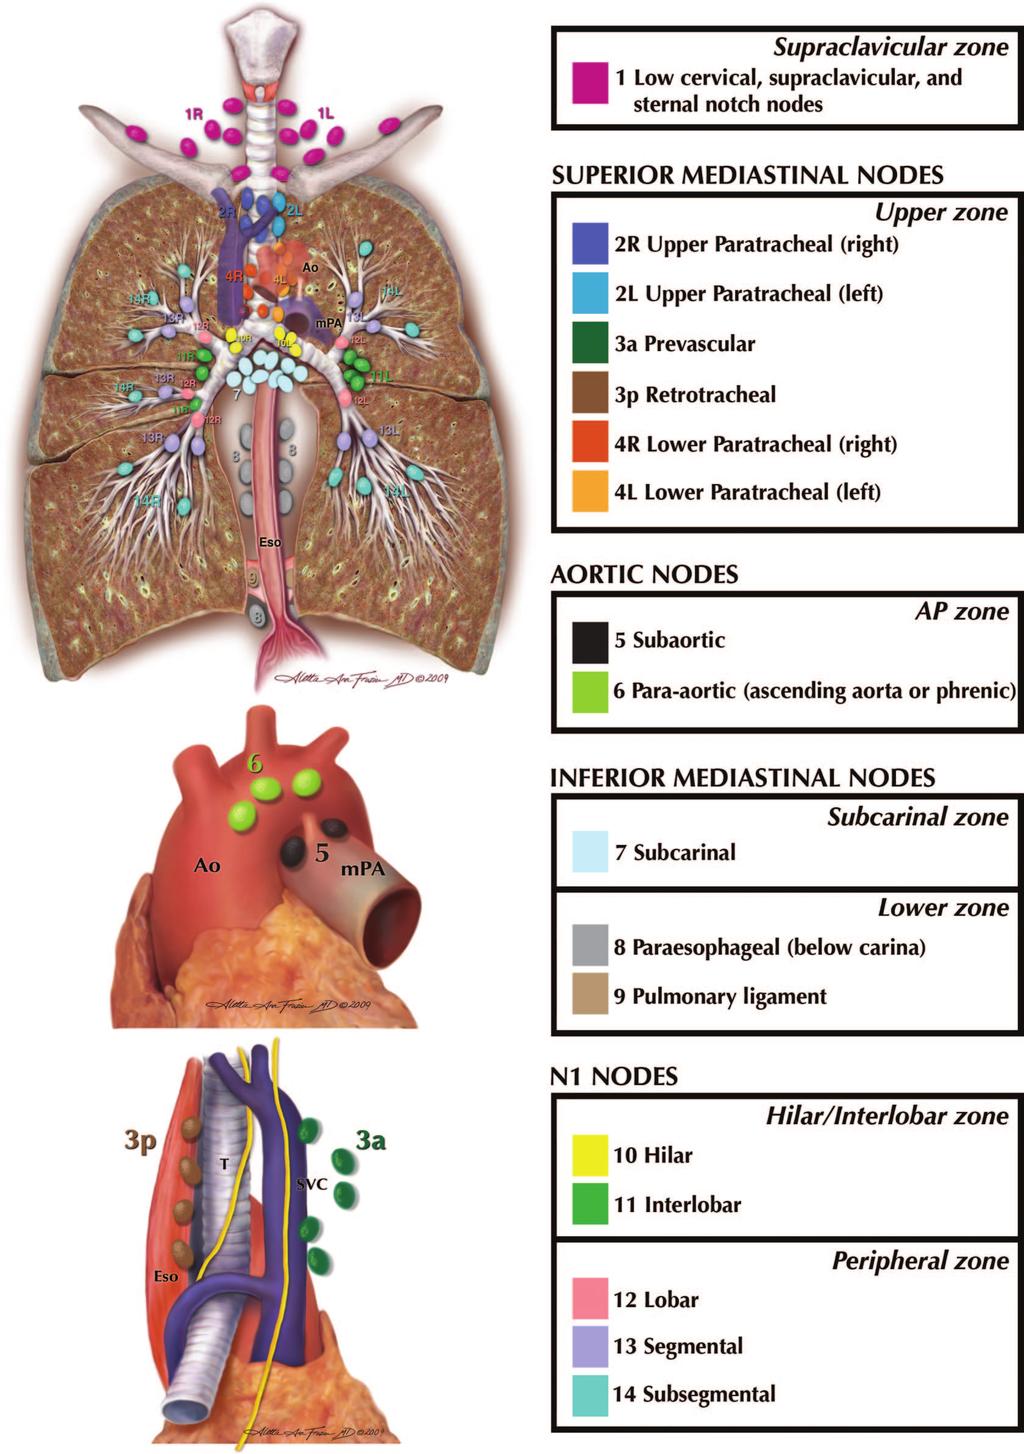 Rusch et al. Journal of Thoracic Oncology Volume 4, Number 5, May 2009 FIGURE 3.